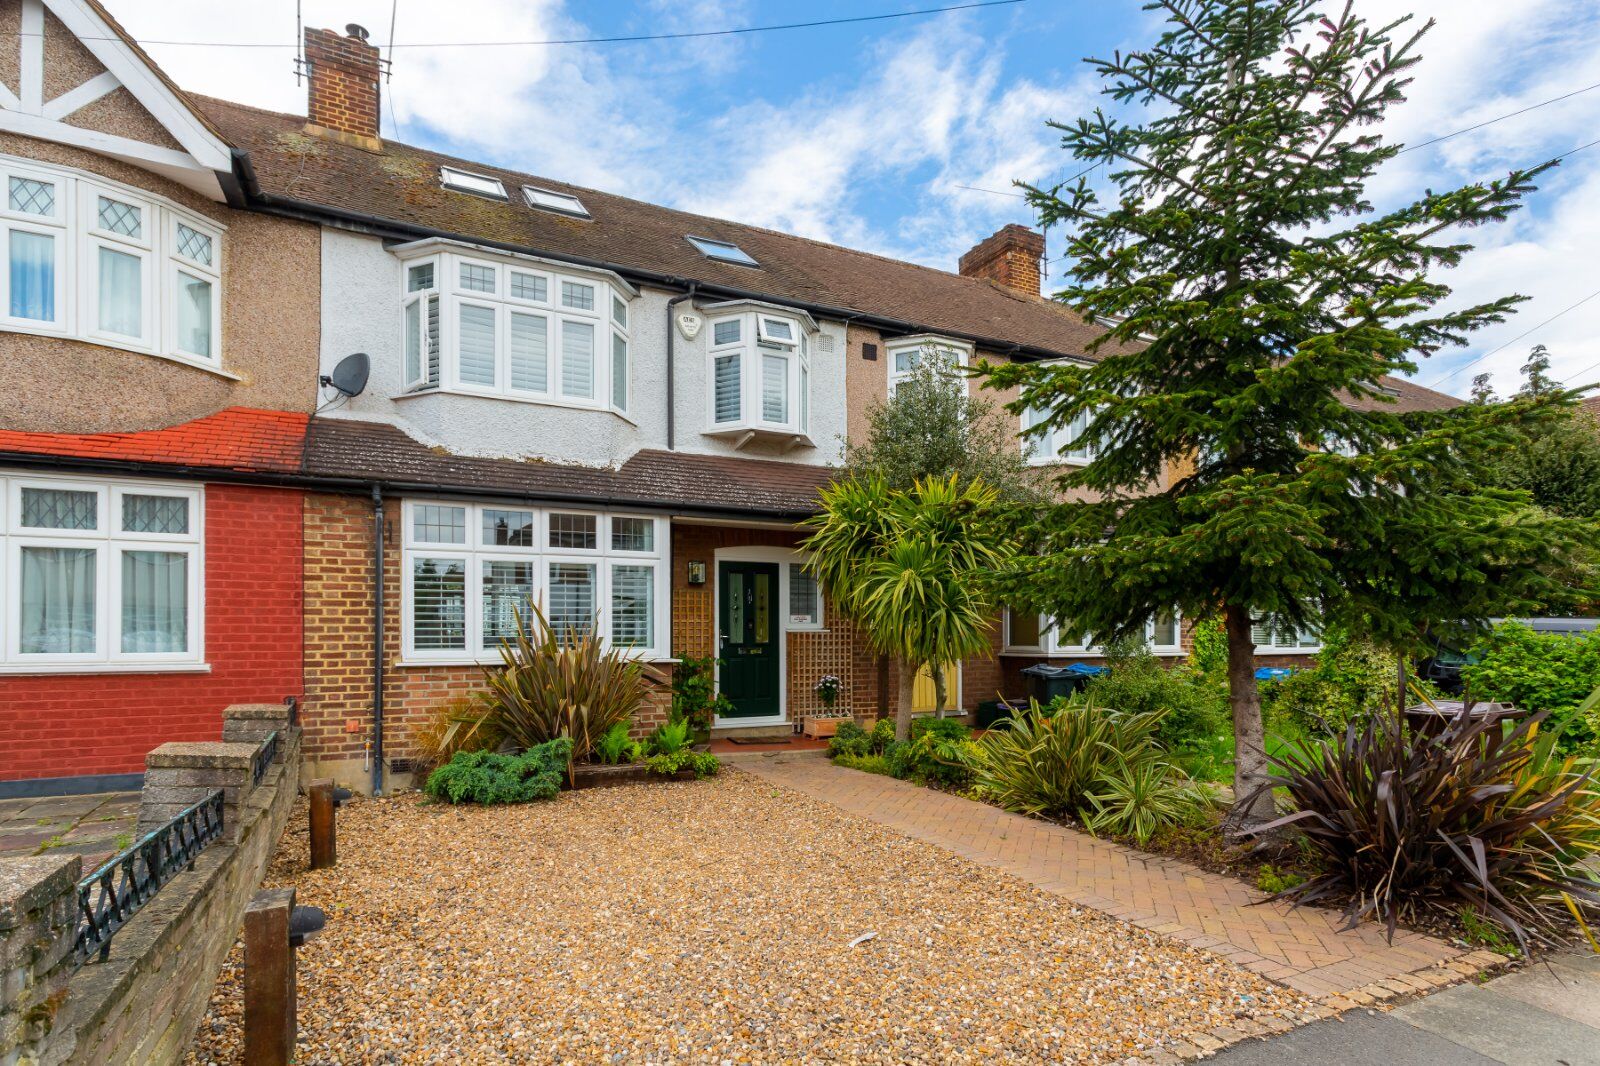 4 bedroom mid terraced house for sale Monkleigh Road, Morden, SM4, main image